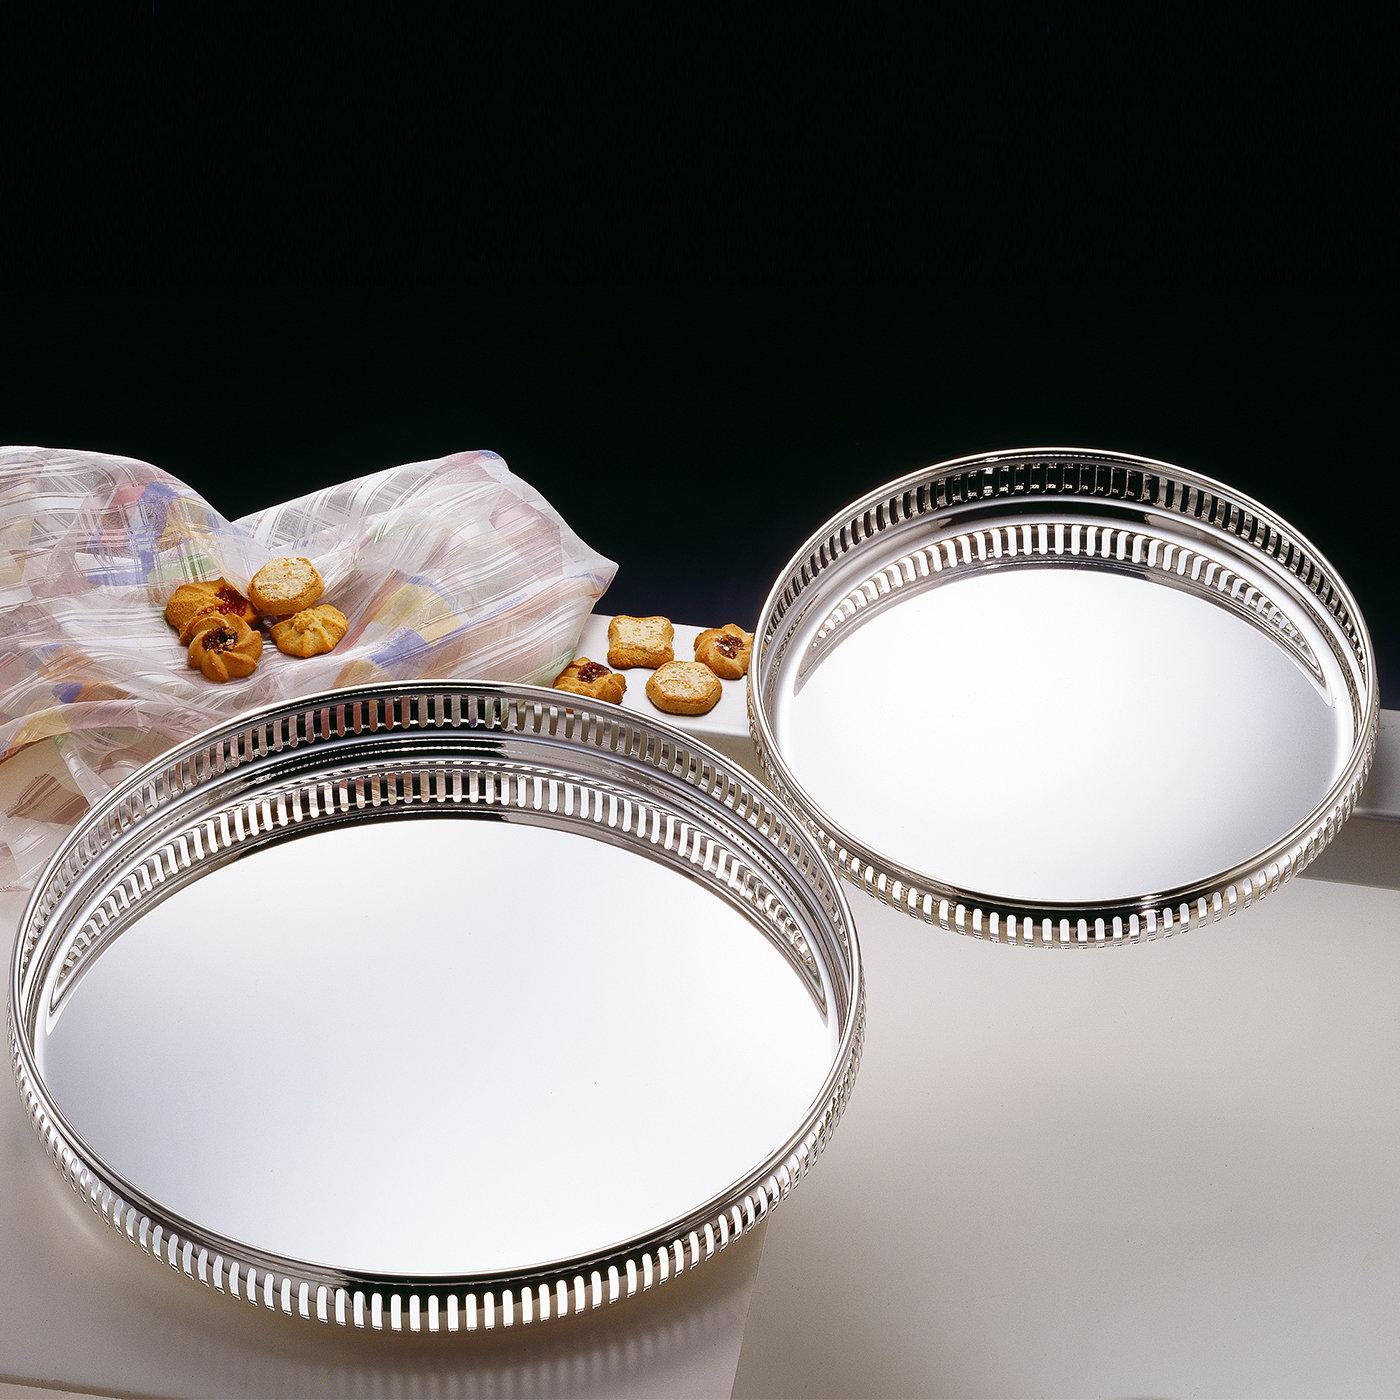 Stunning round serving tray beautifully made in 